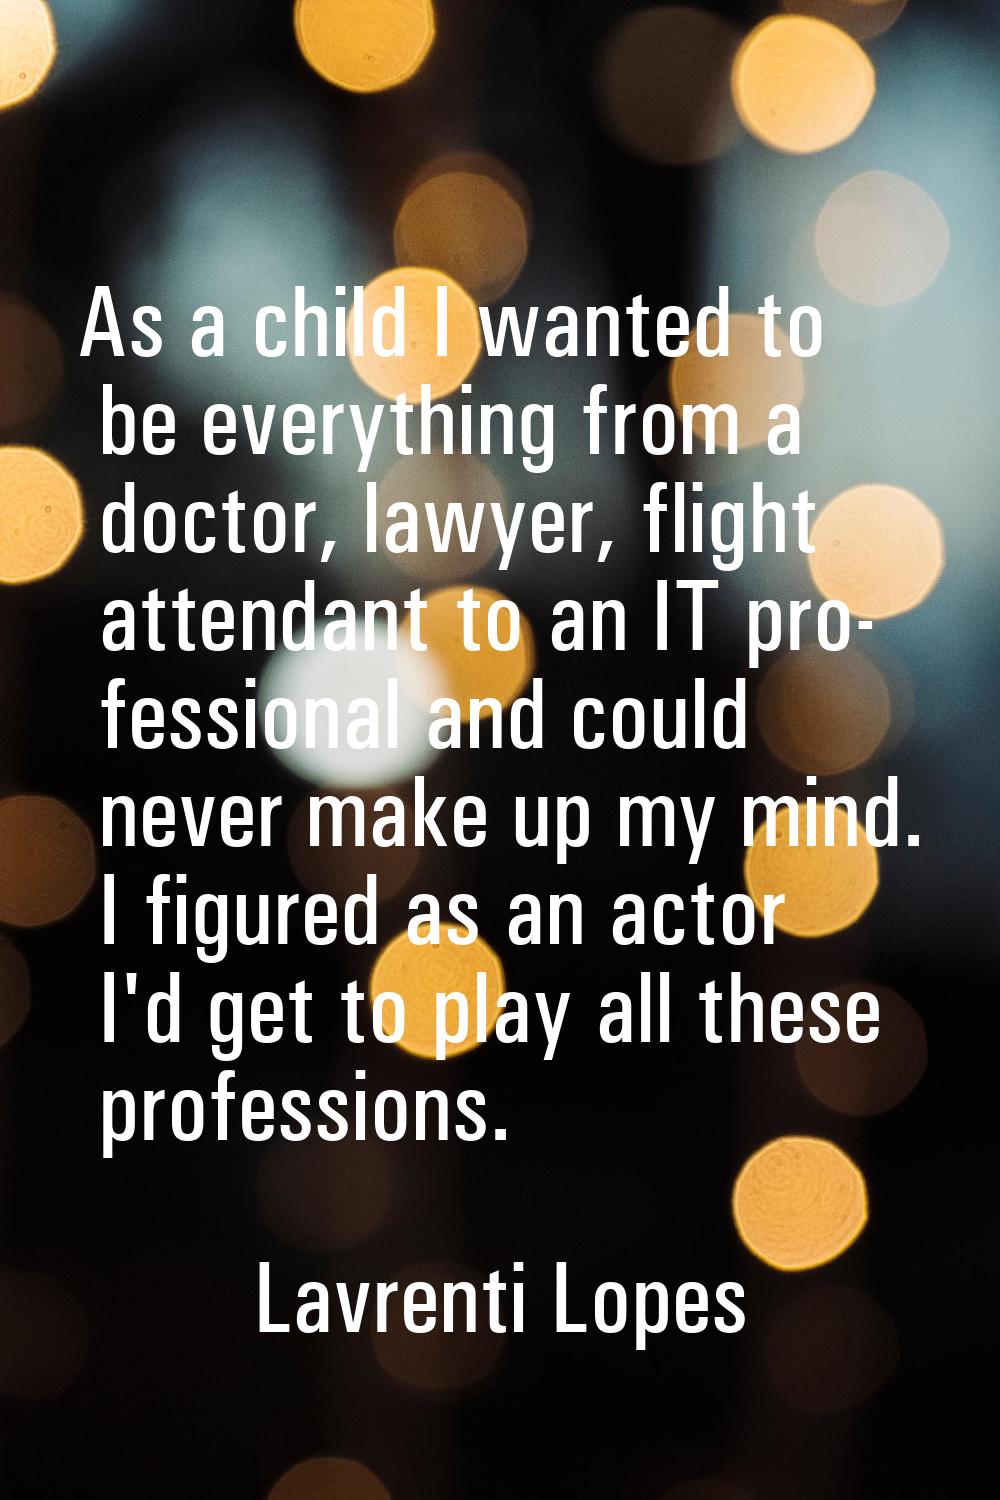 As a child I wanted to be everything from a doctor, lawyer, flight attendant to an IT pro- fessiona